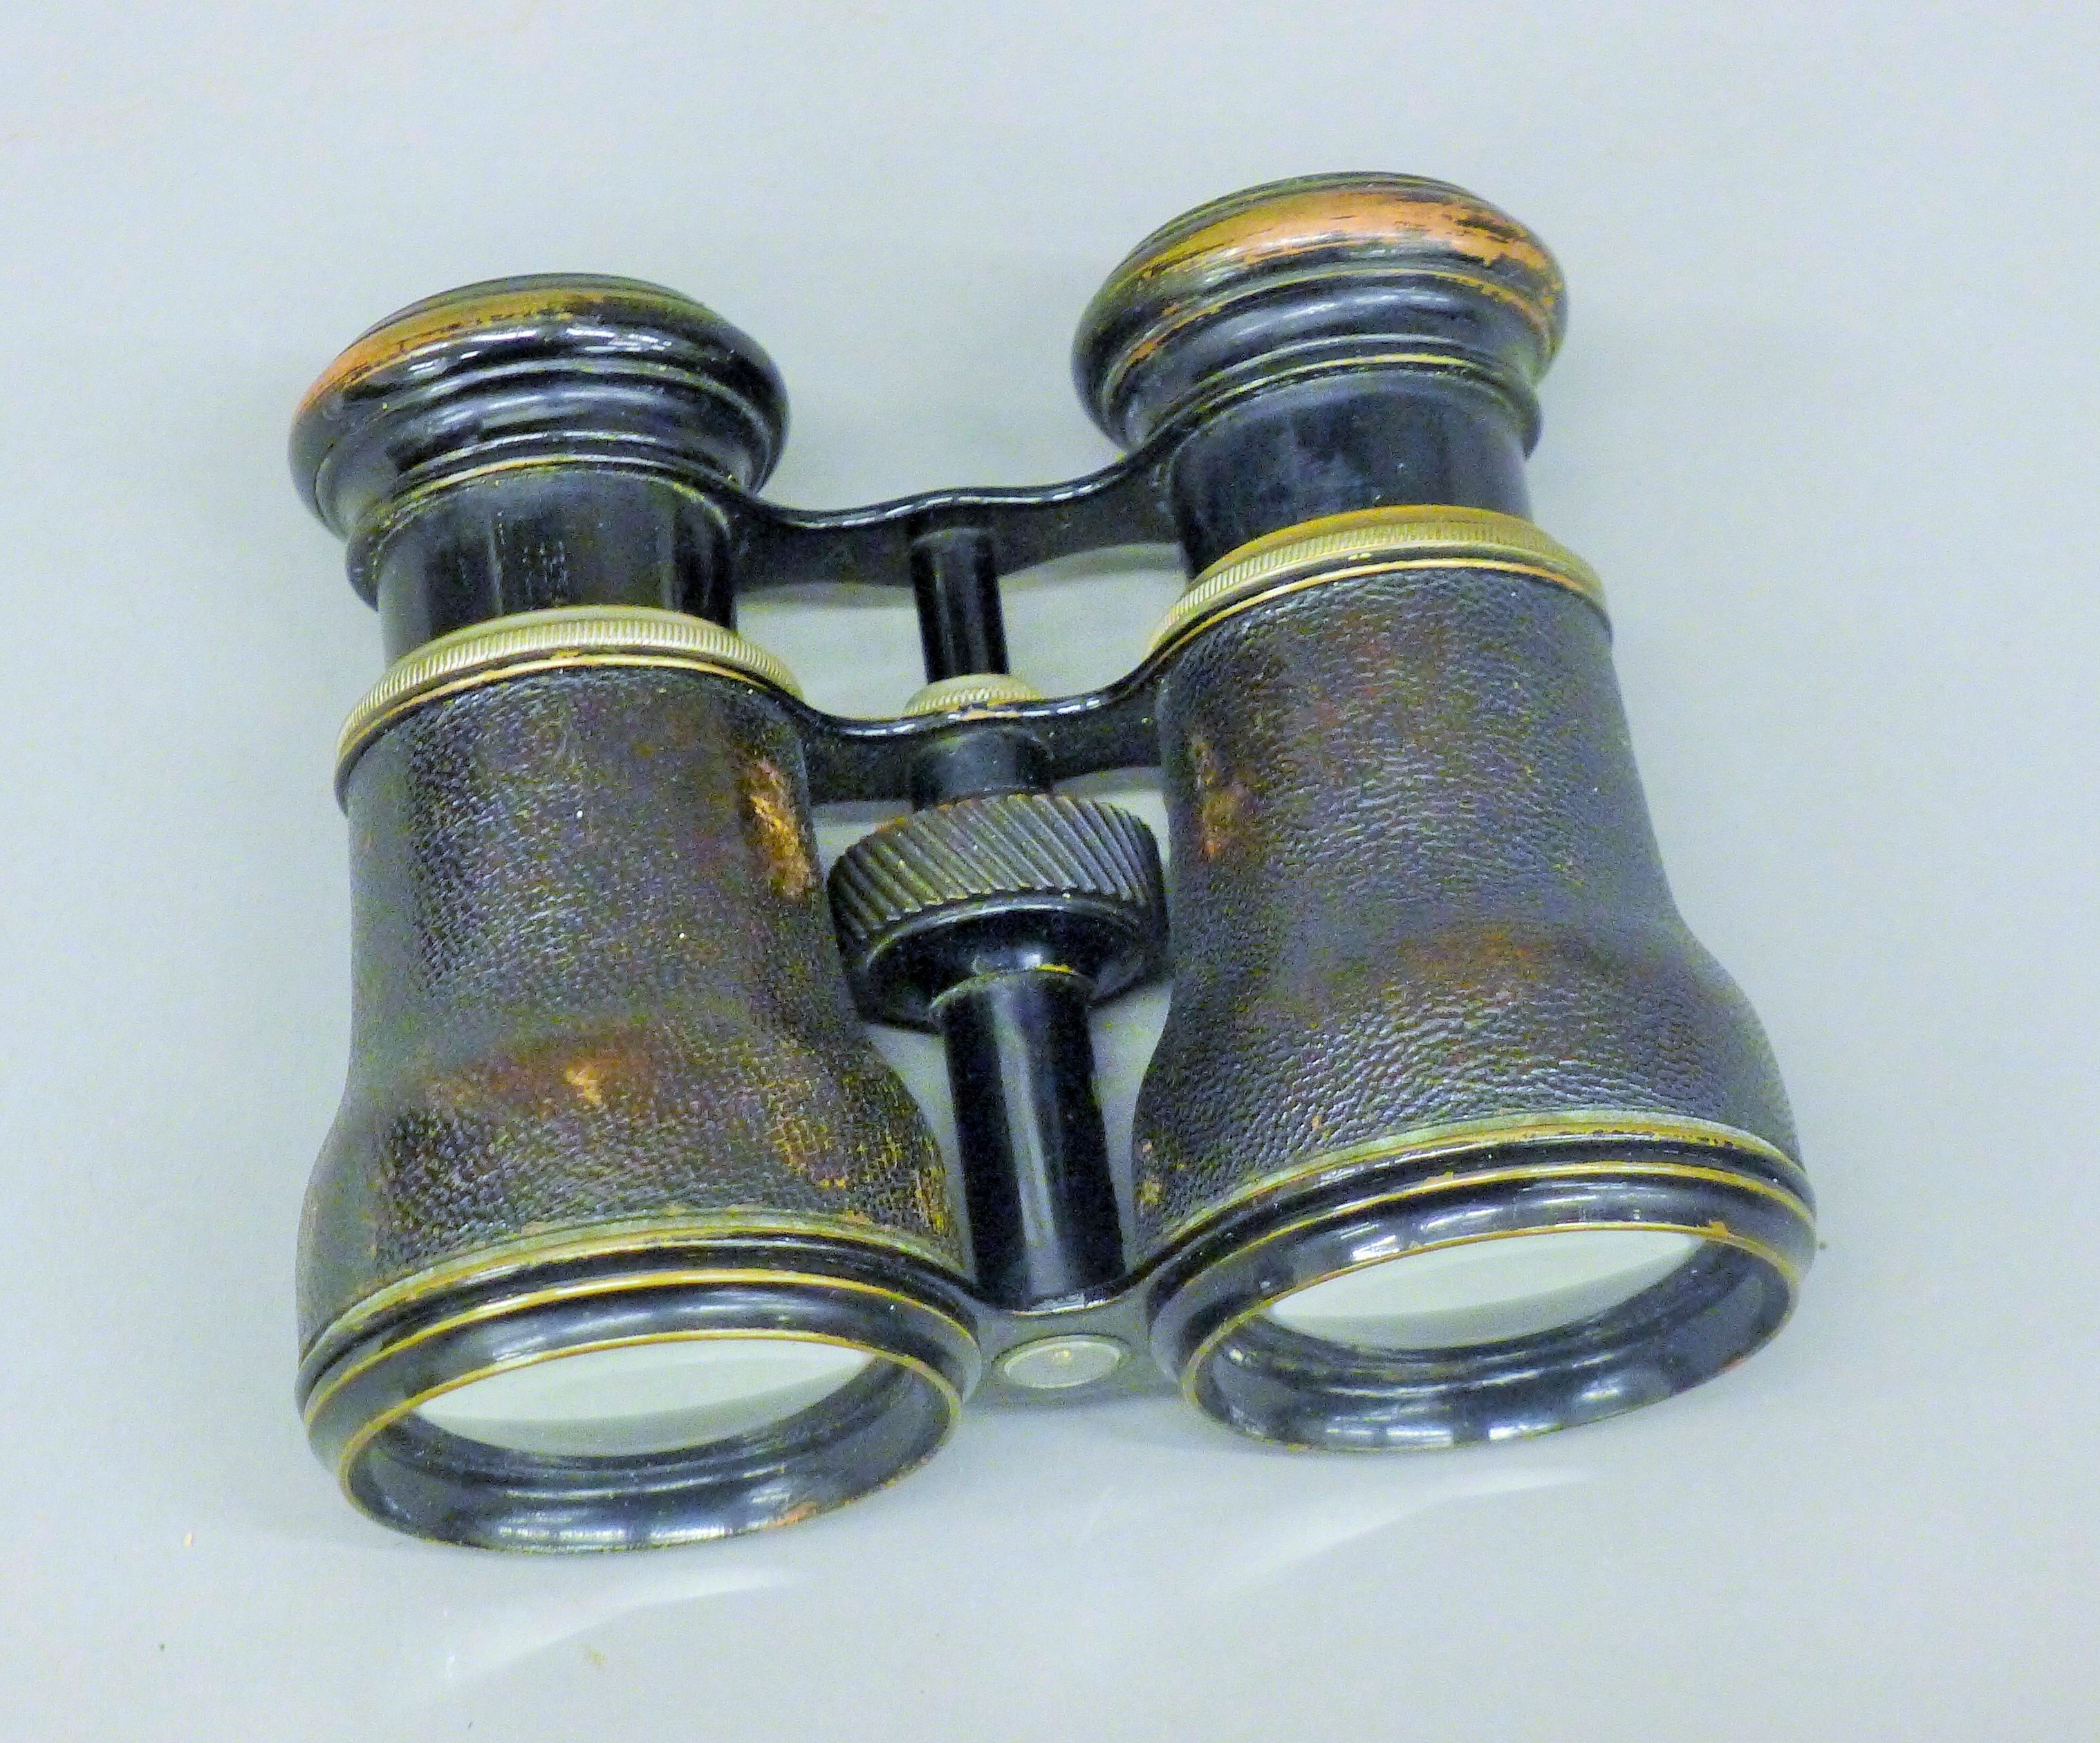 A pair of field glasses with inset compass, case. 13.5 cm wide overall. - Image 5 of 5